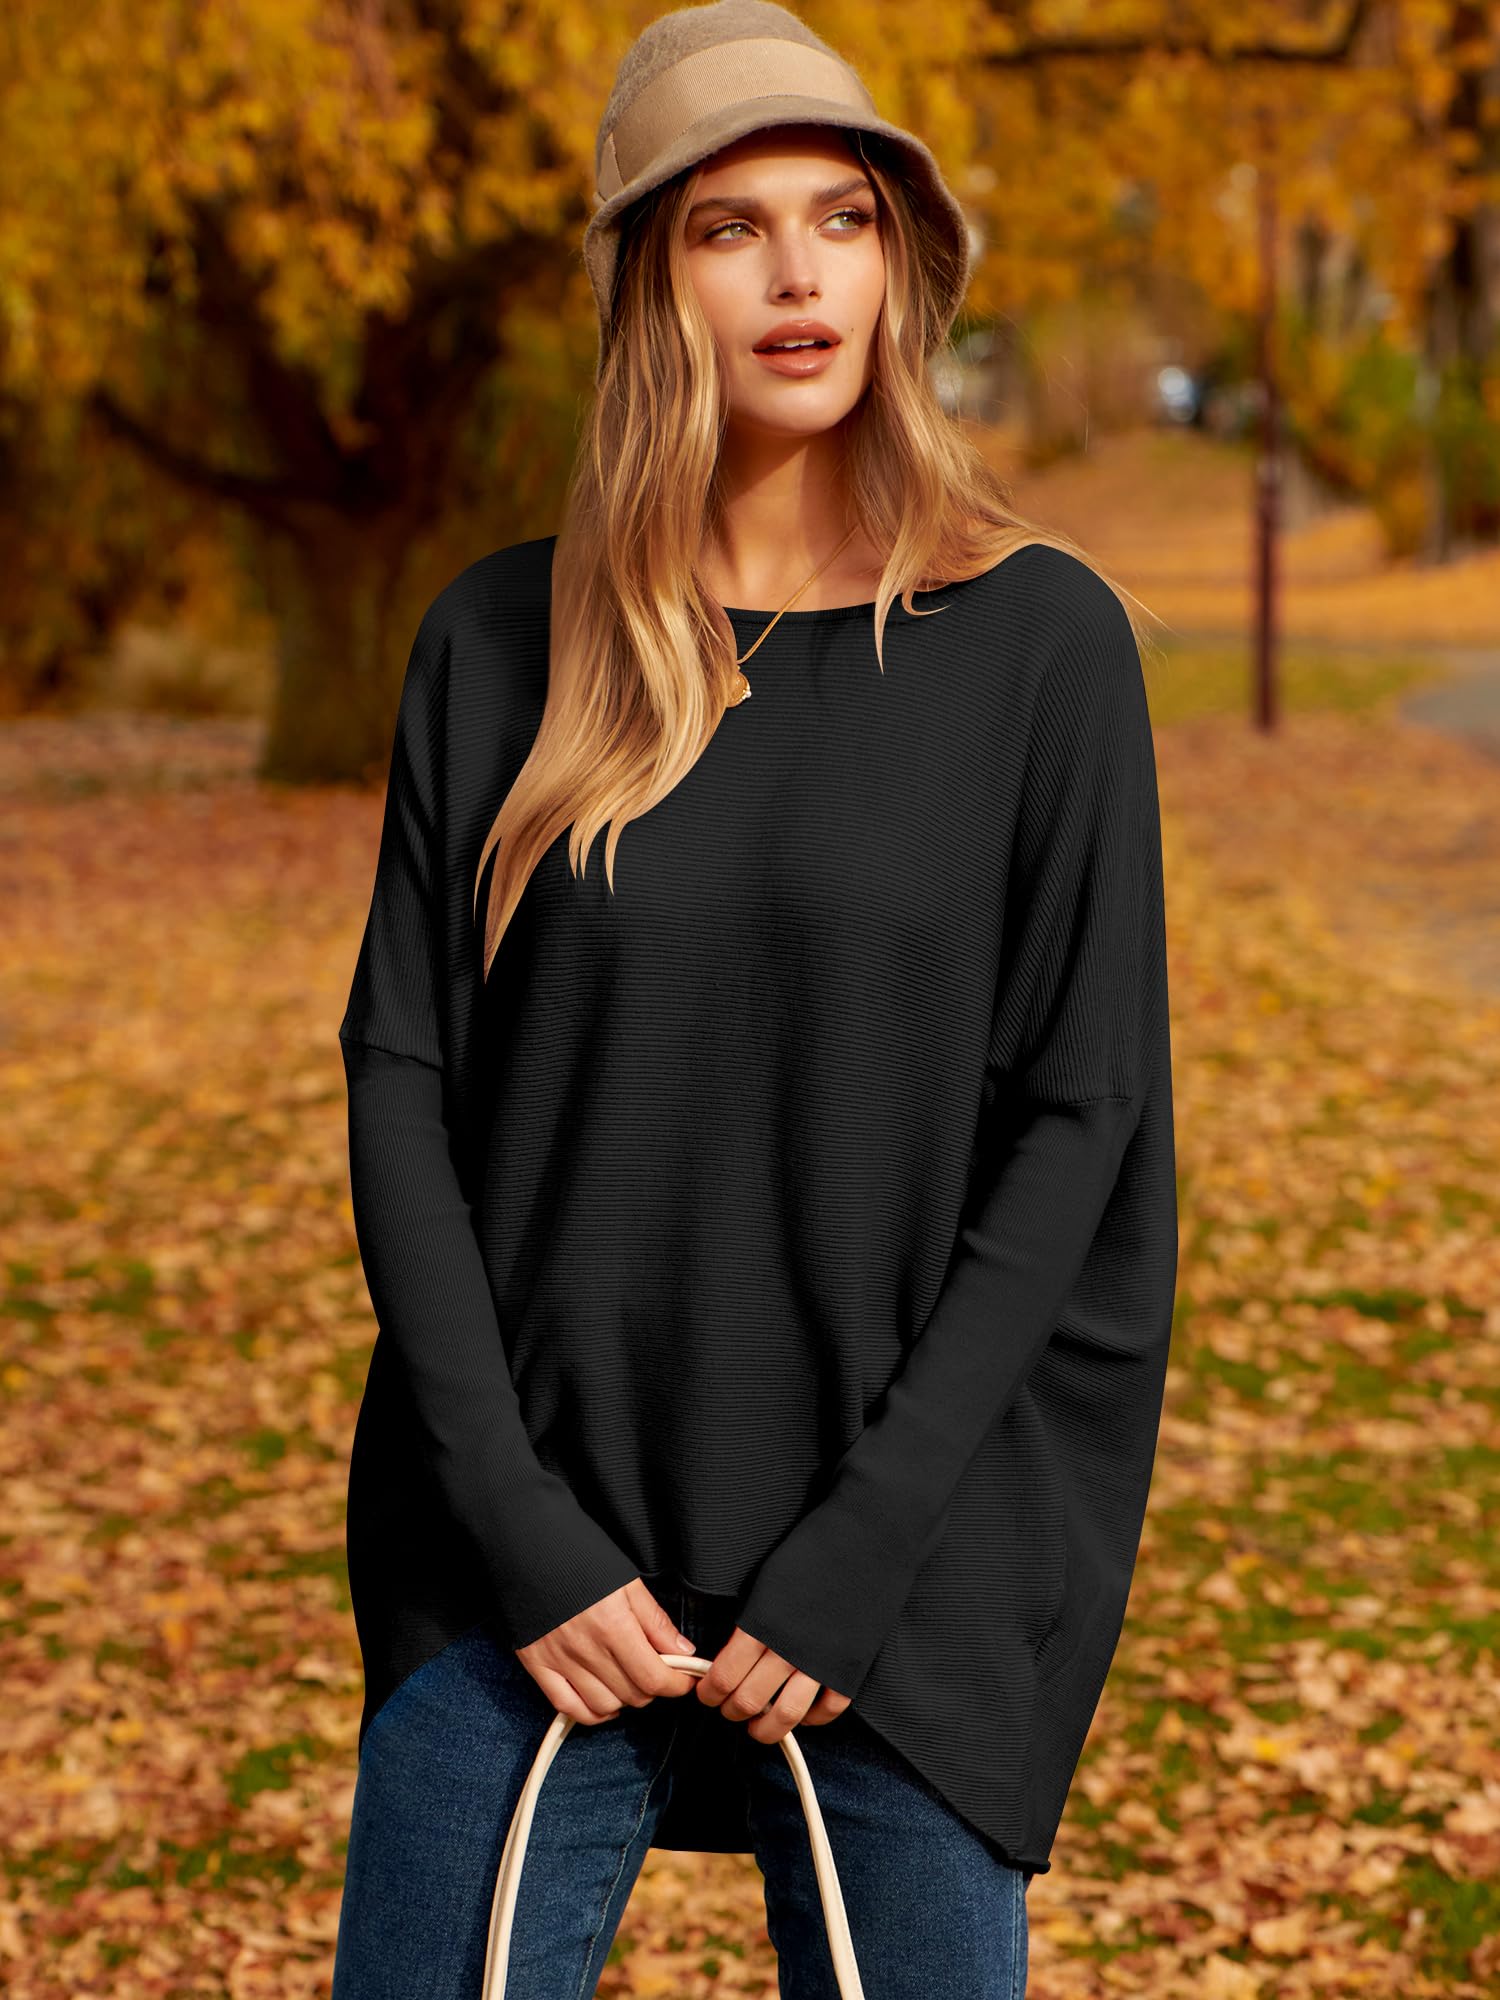 Women's Oversized Dolman Sleeve Knitted Pullover Casual Sweater(Buy 2 Free Shipping)